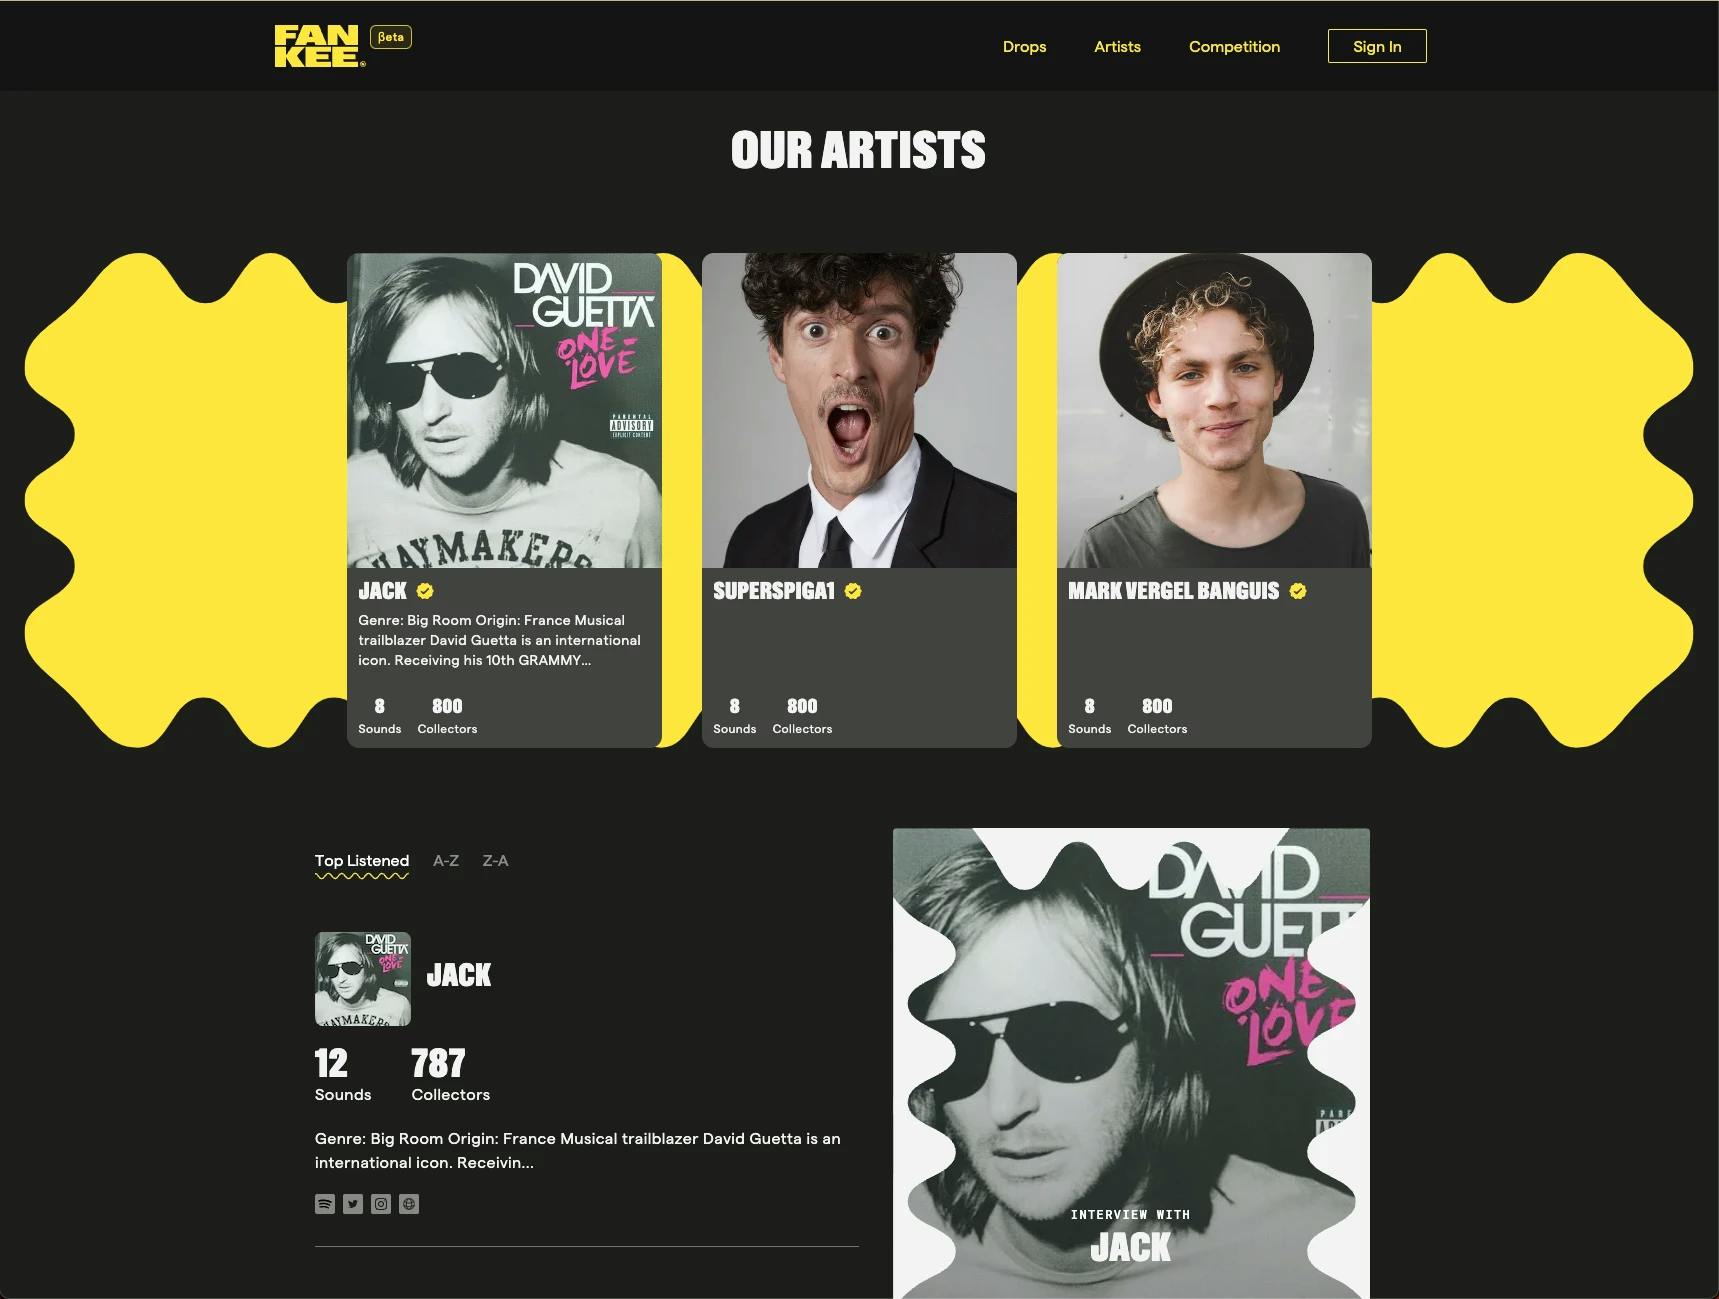 Artists page